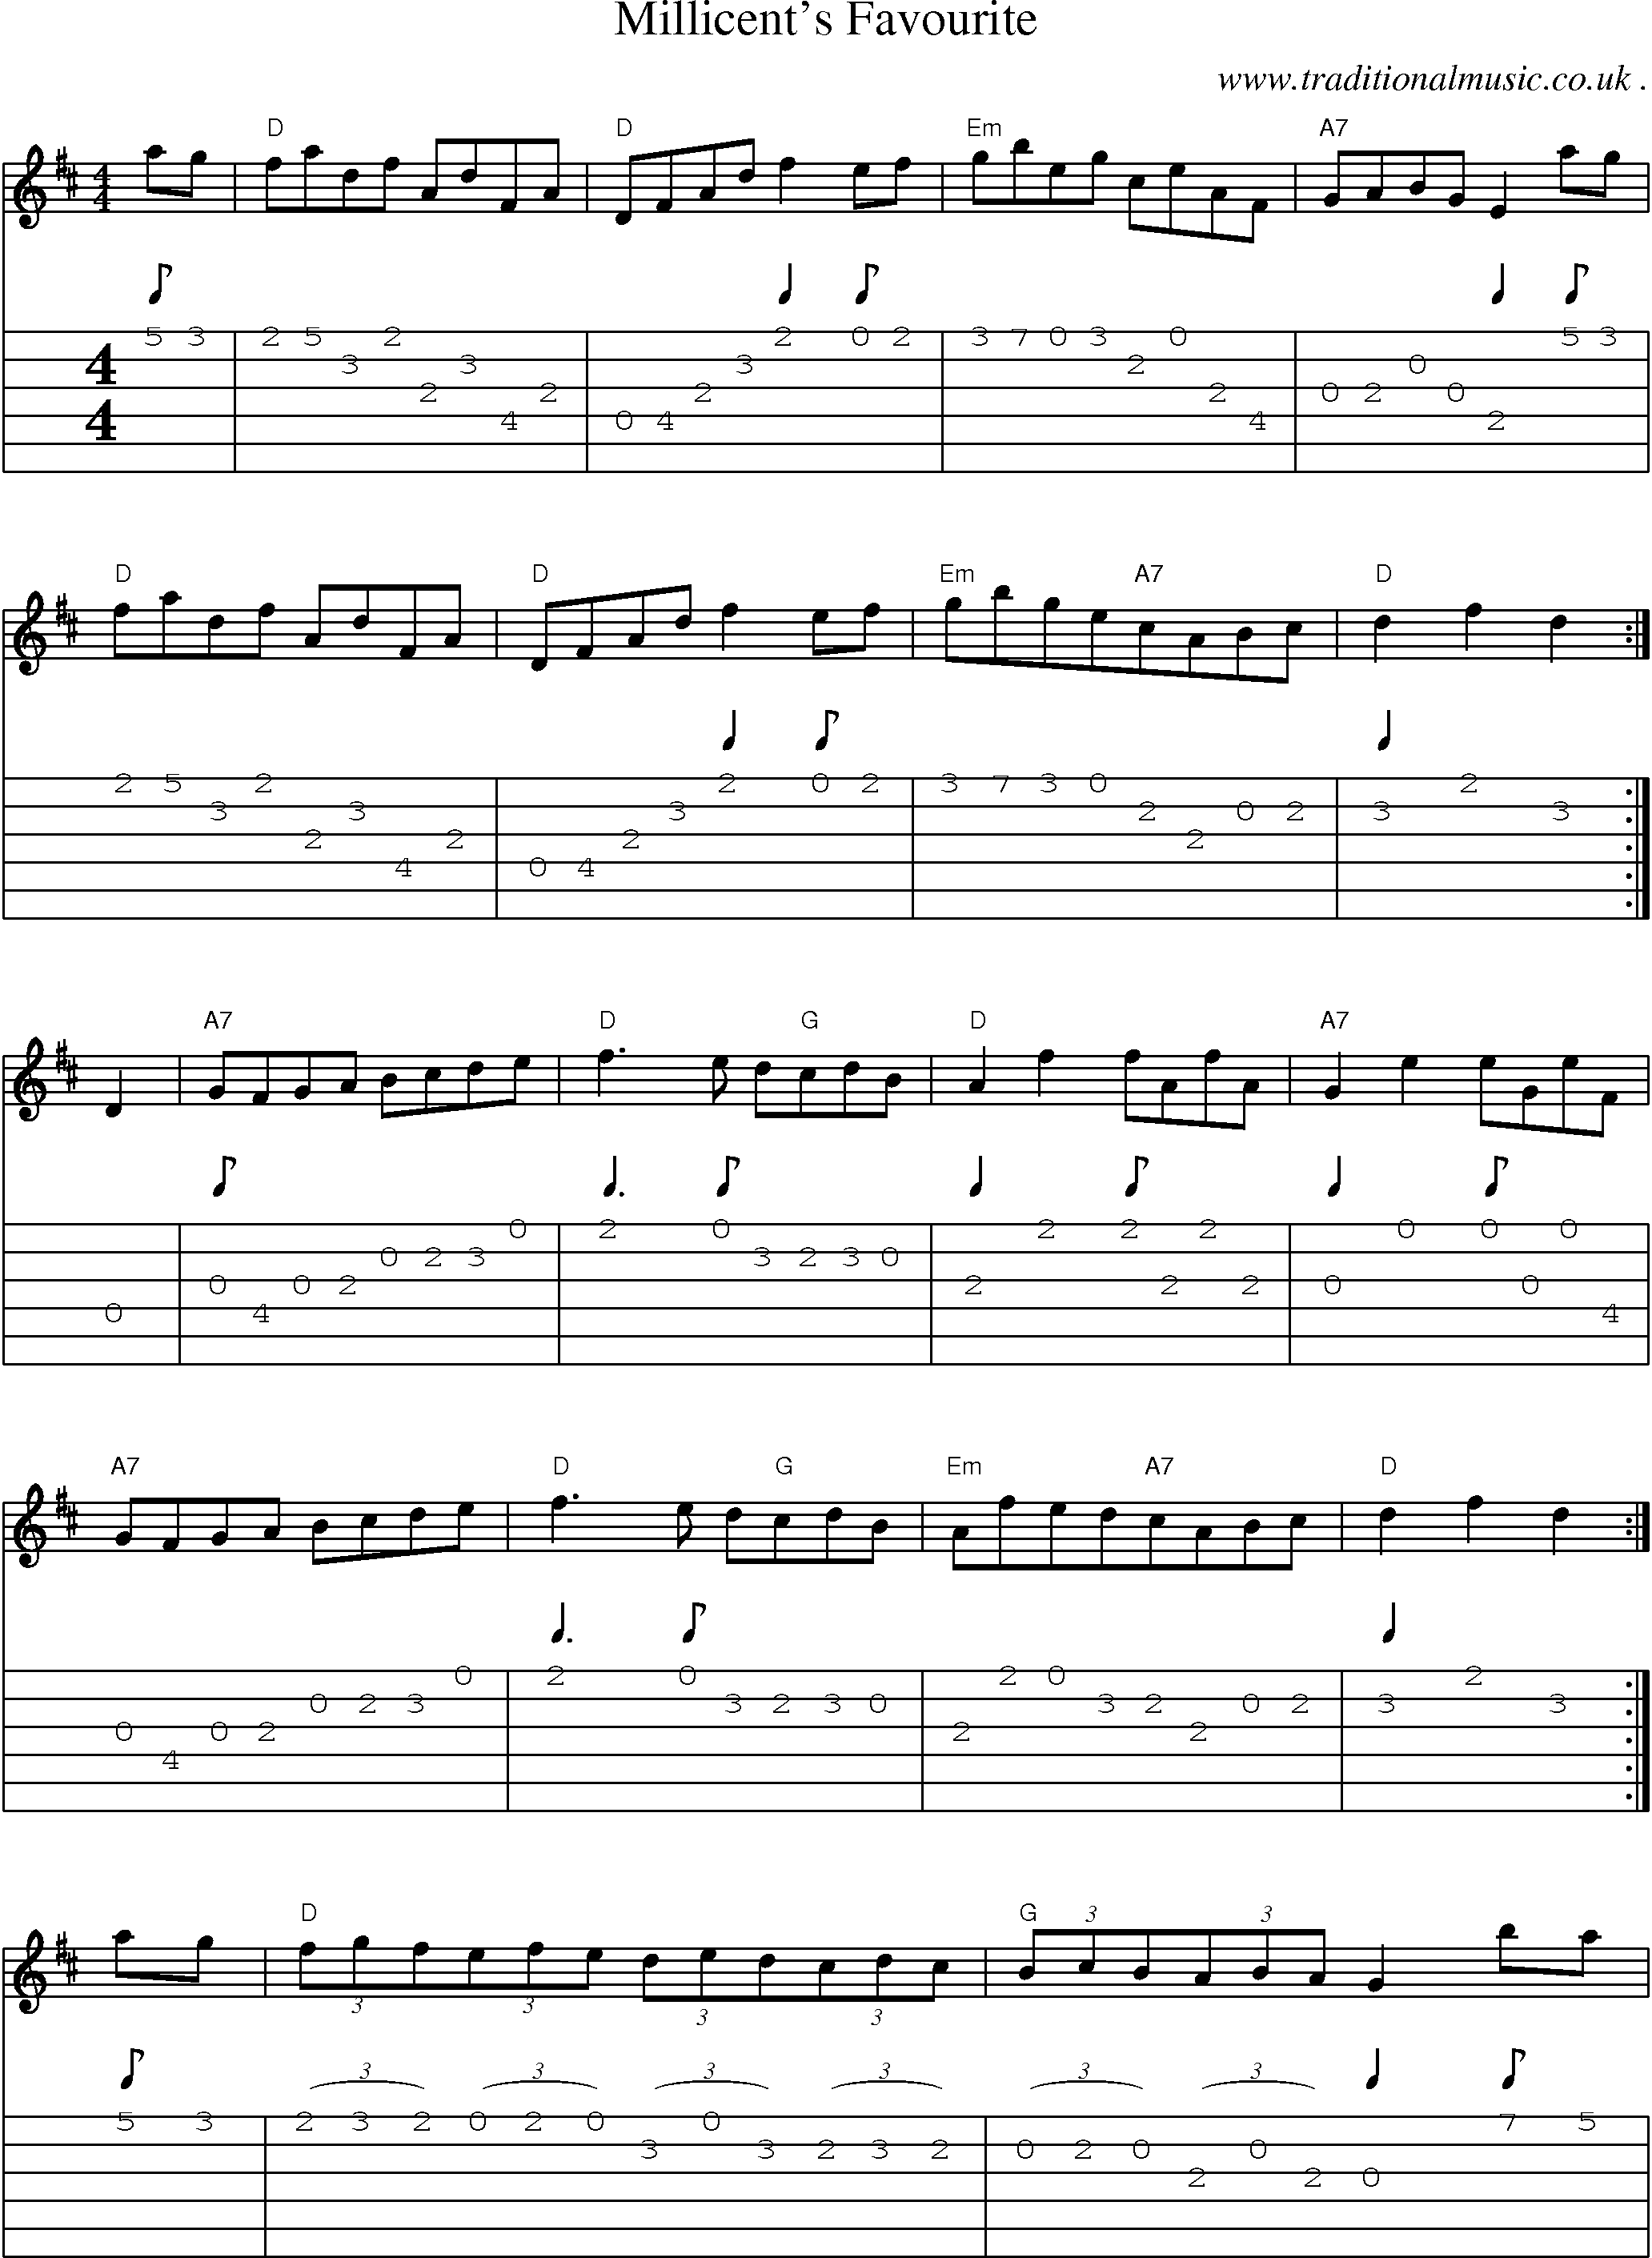 Sheet-Music and Guitar Tabs for Millicents Favourite